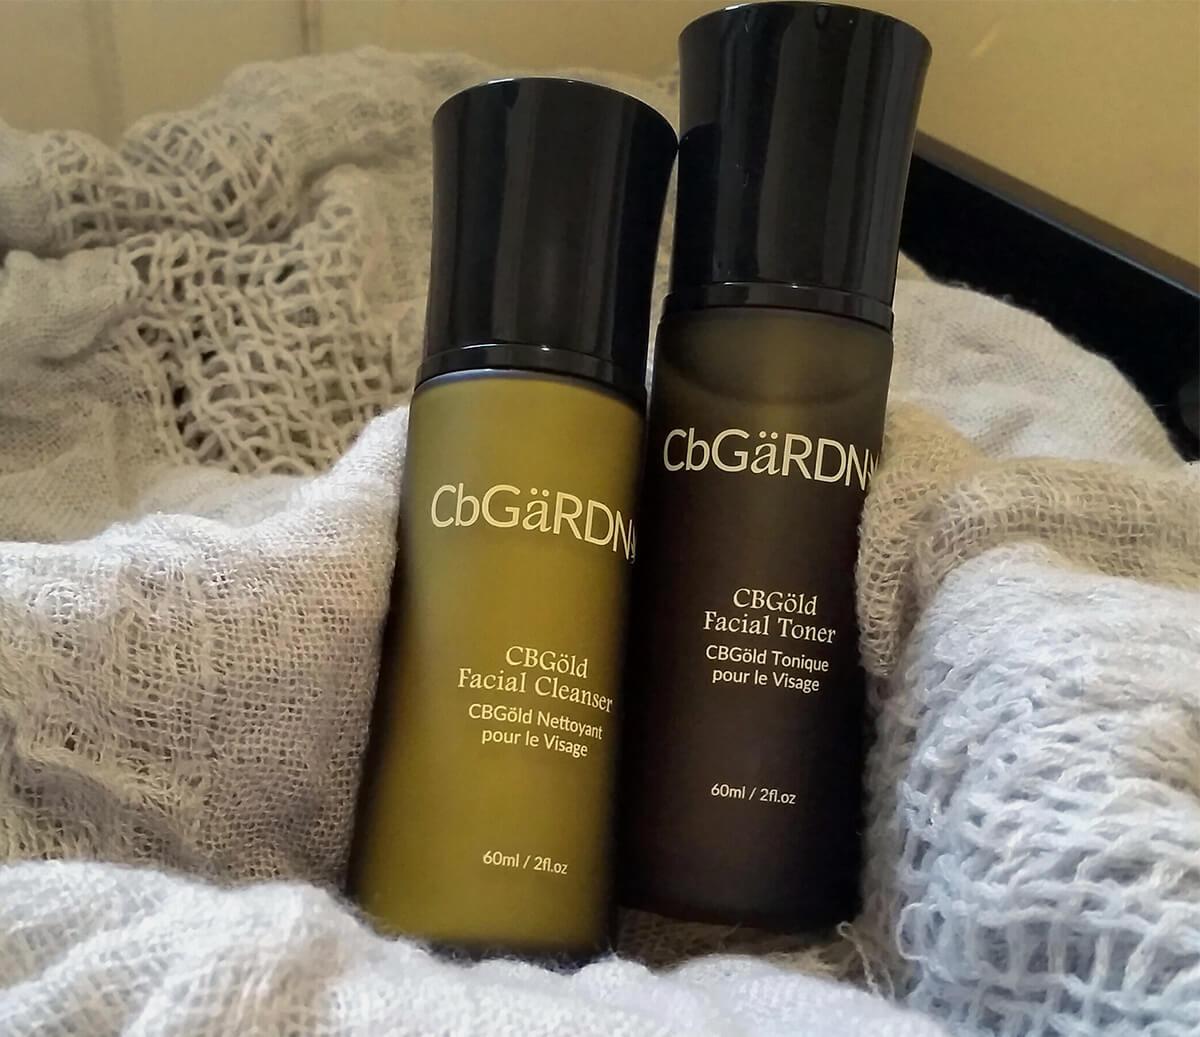 CBGold Cleanser and Toner